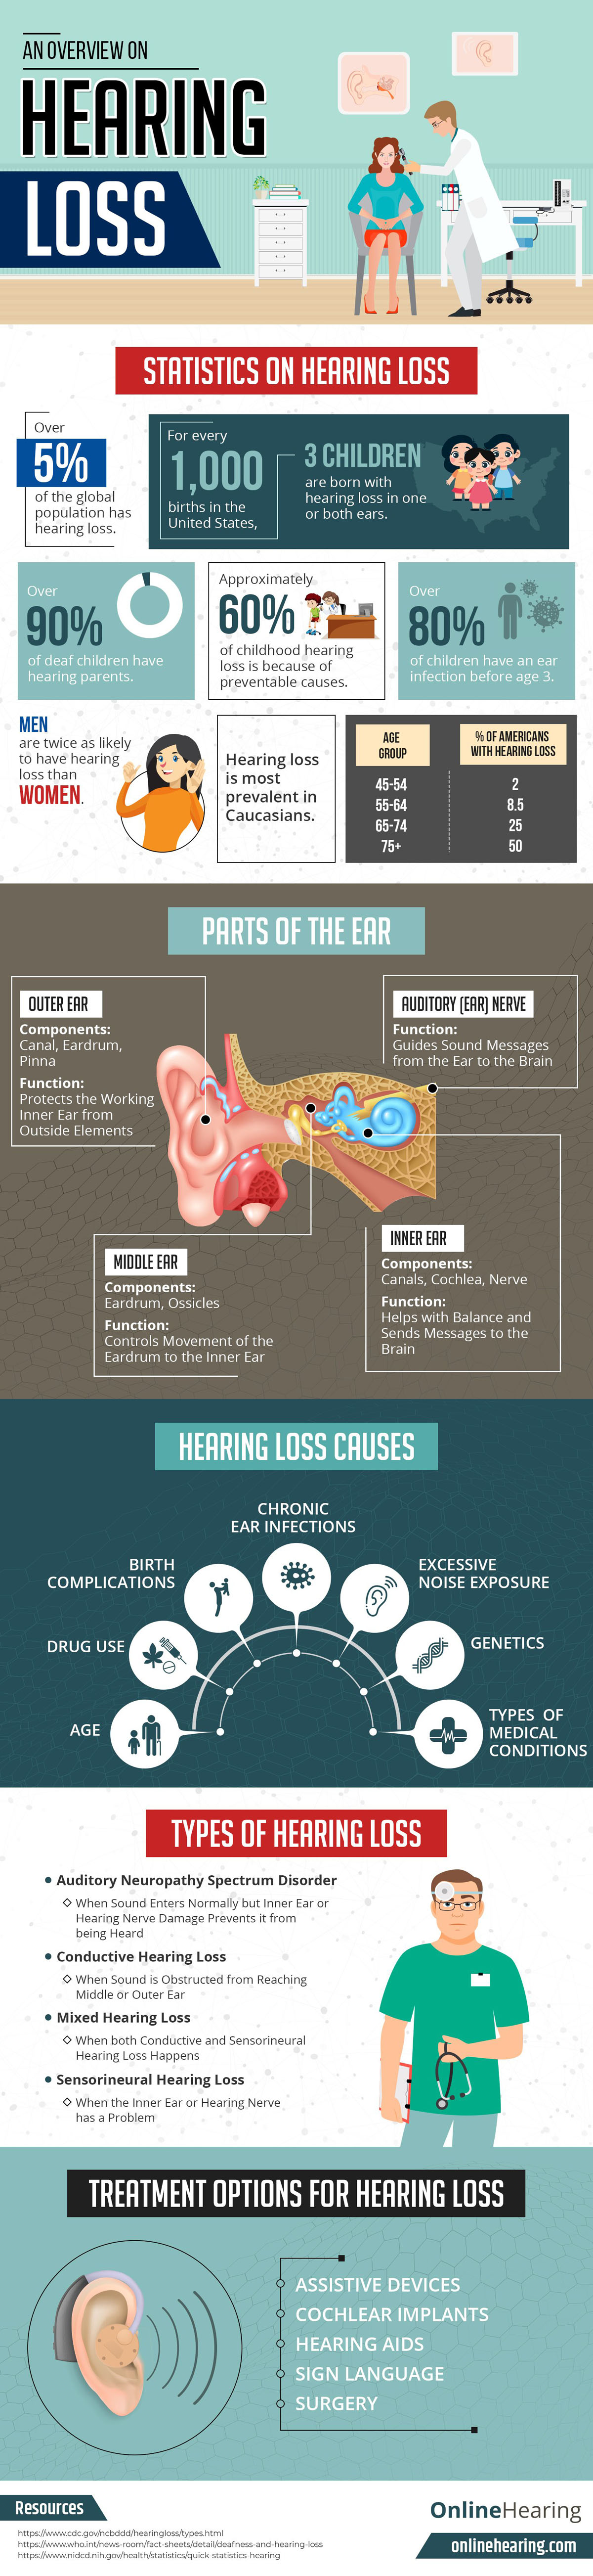 An Overview of Hearing Loss